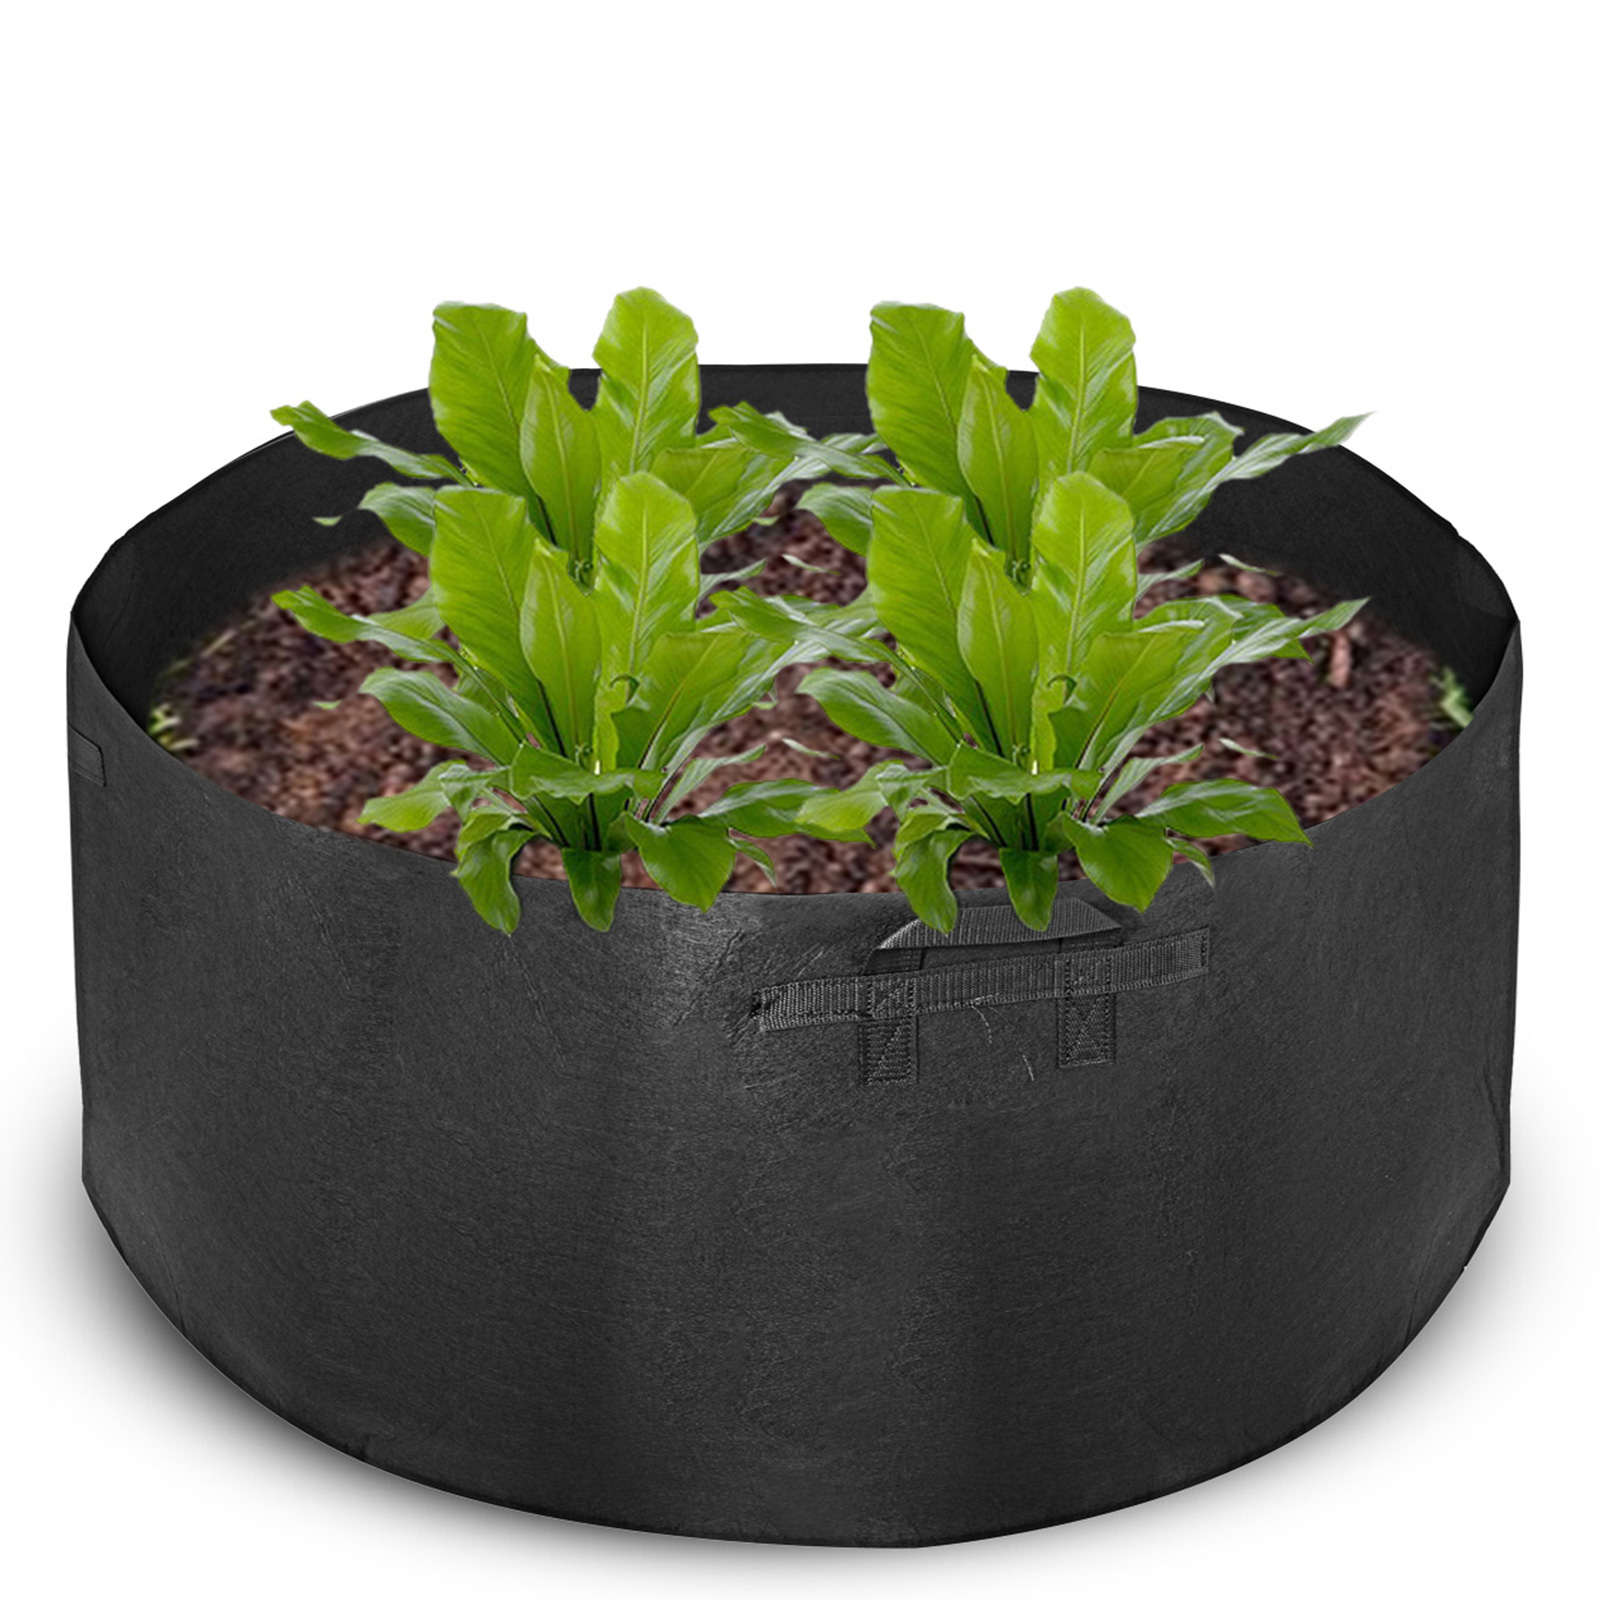 Garden Grow Bags Aeration Fabric Pots w/Handles Root Container 